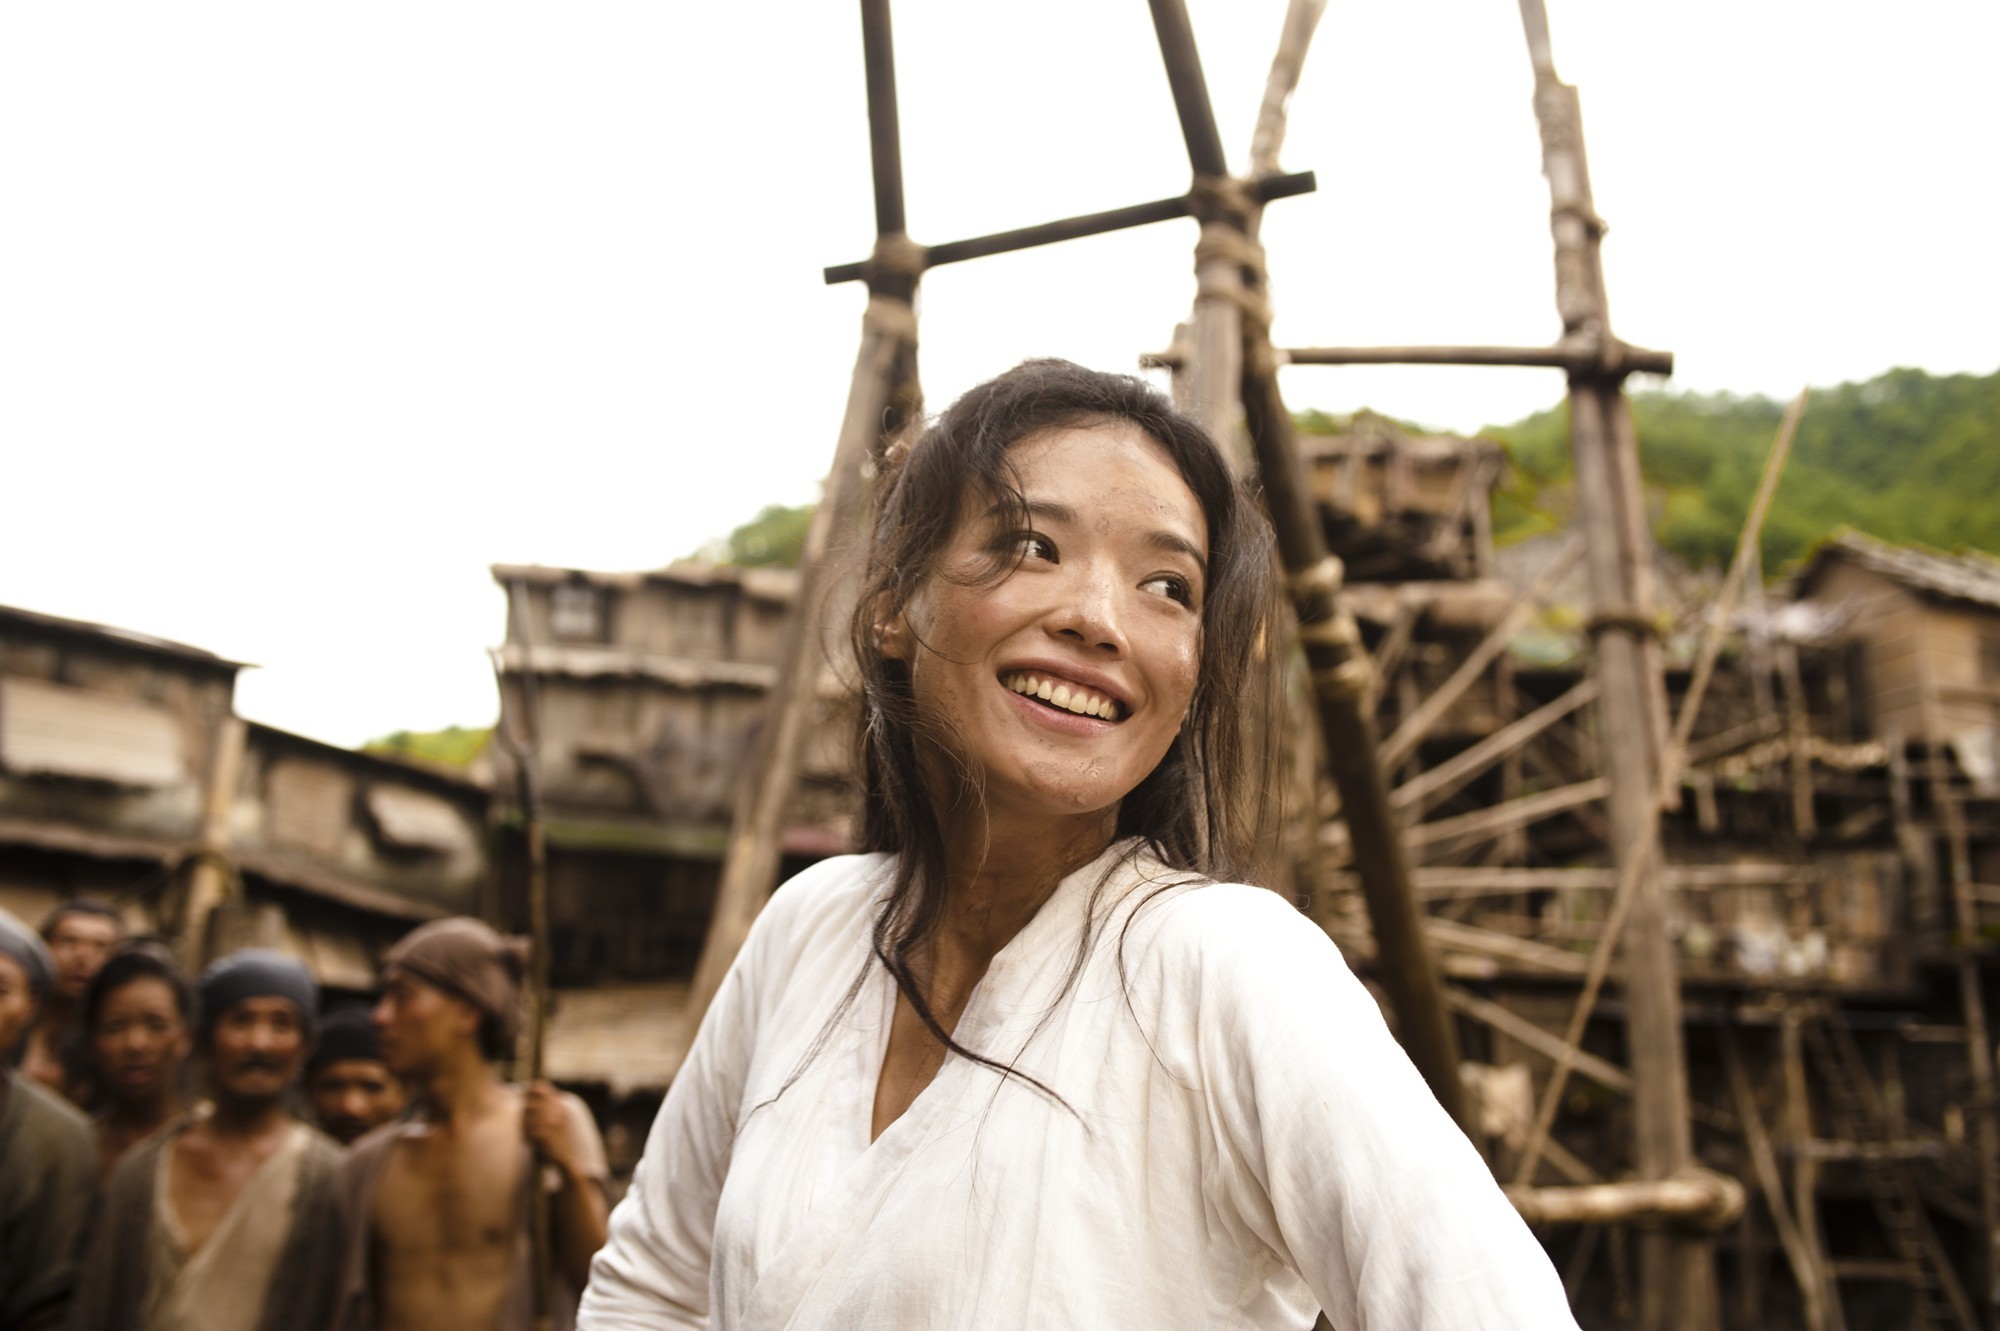 Shu Qi in Magnet Releasing's Journey to the West (2014)